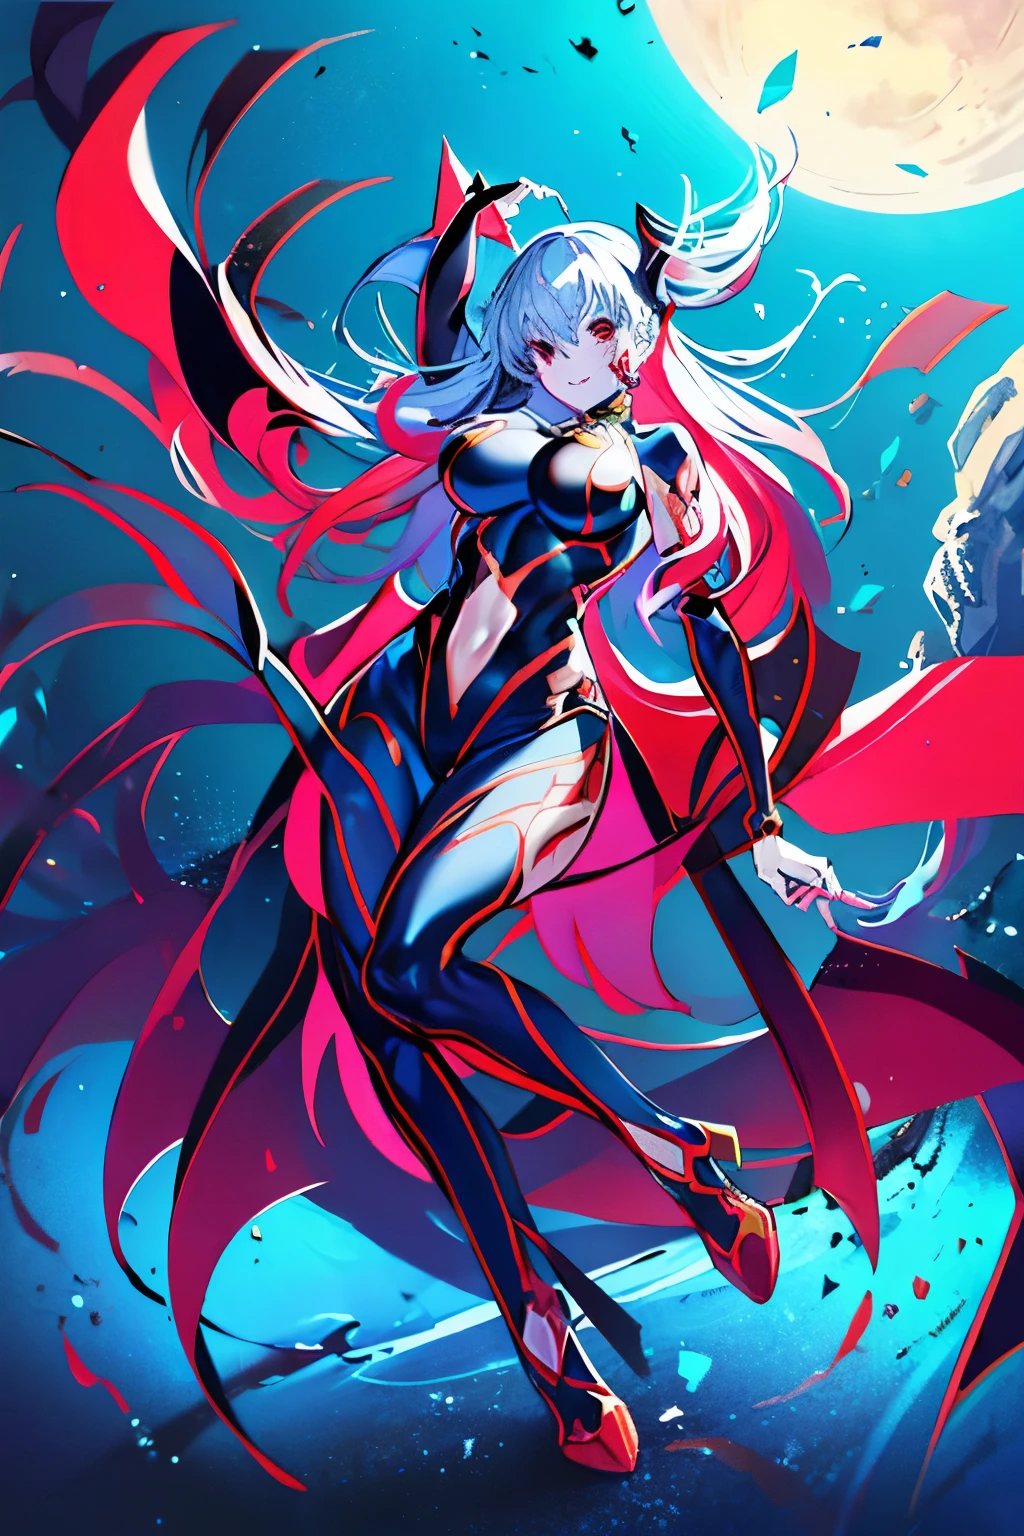 Draw the face carefully　15 year old girl　Anime style high quality face　blonde　shiny black full body suit　black high heels　There are red lines all over the body　attraction　laughter　Morrigan Aensland